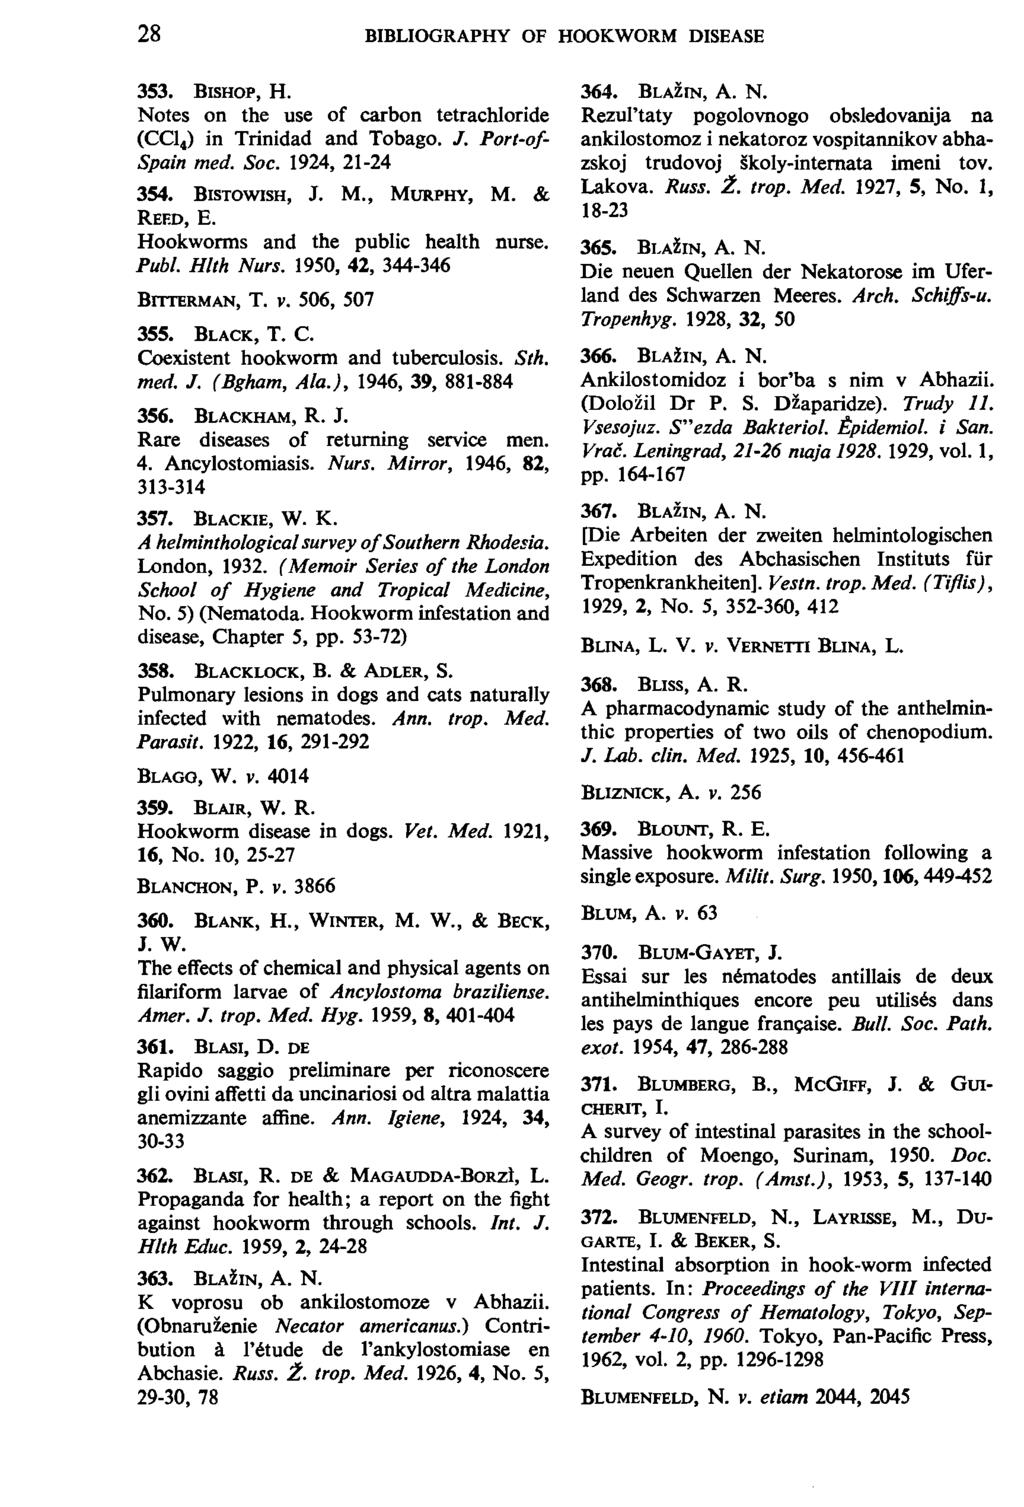 28 BIBLIOGRAPHY OF HOOKWORM DISEASE 353. BISHOP, H. Notes on the use of carbon tetrachloride (CC!,) in Trinidad and Tobago. J. Port-of Spain med. Soc. 1924, 21-24 354. BISTOWISH, J. M., MURPHY, M.